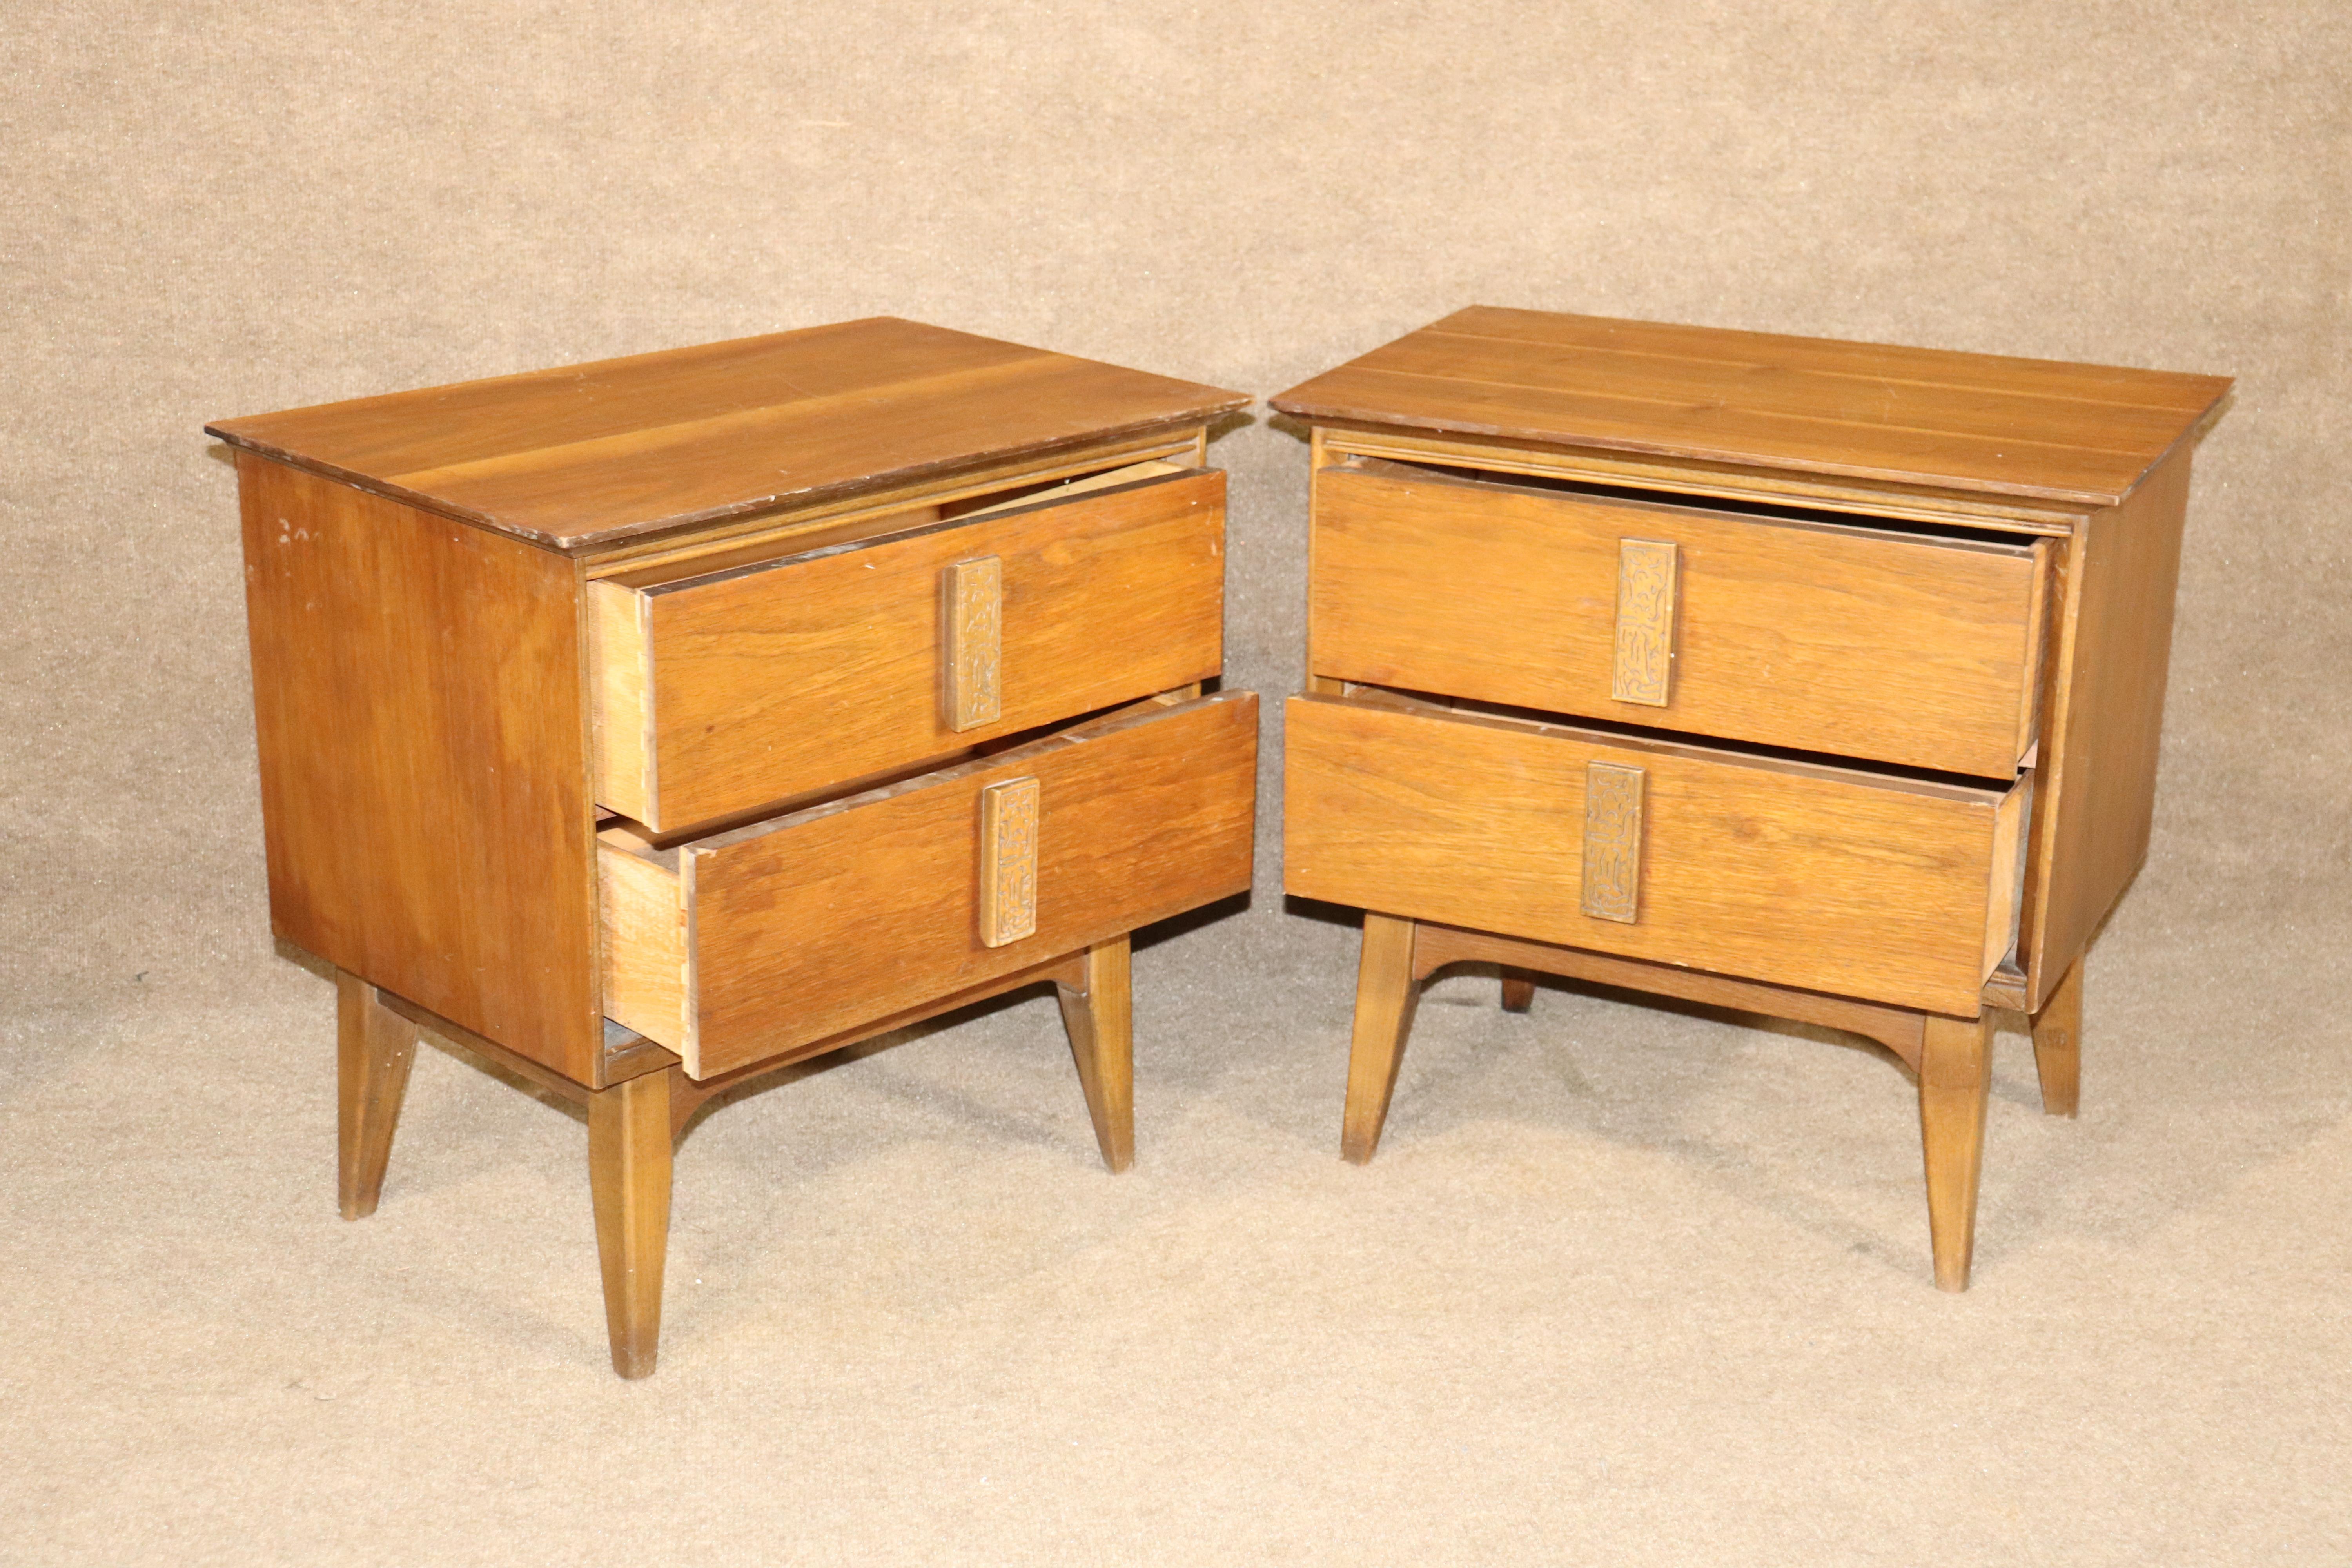 Pair of mid-century walnut tables by Bassett for their 'Mayan' collection. Two drawers for bedside storage, each with carved handles.
Please confirm location NY or NJ.